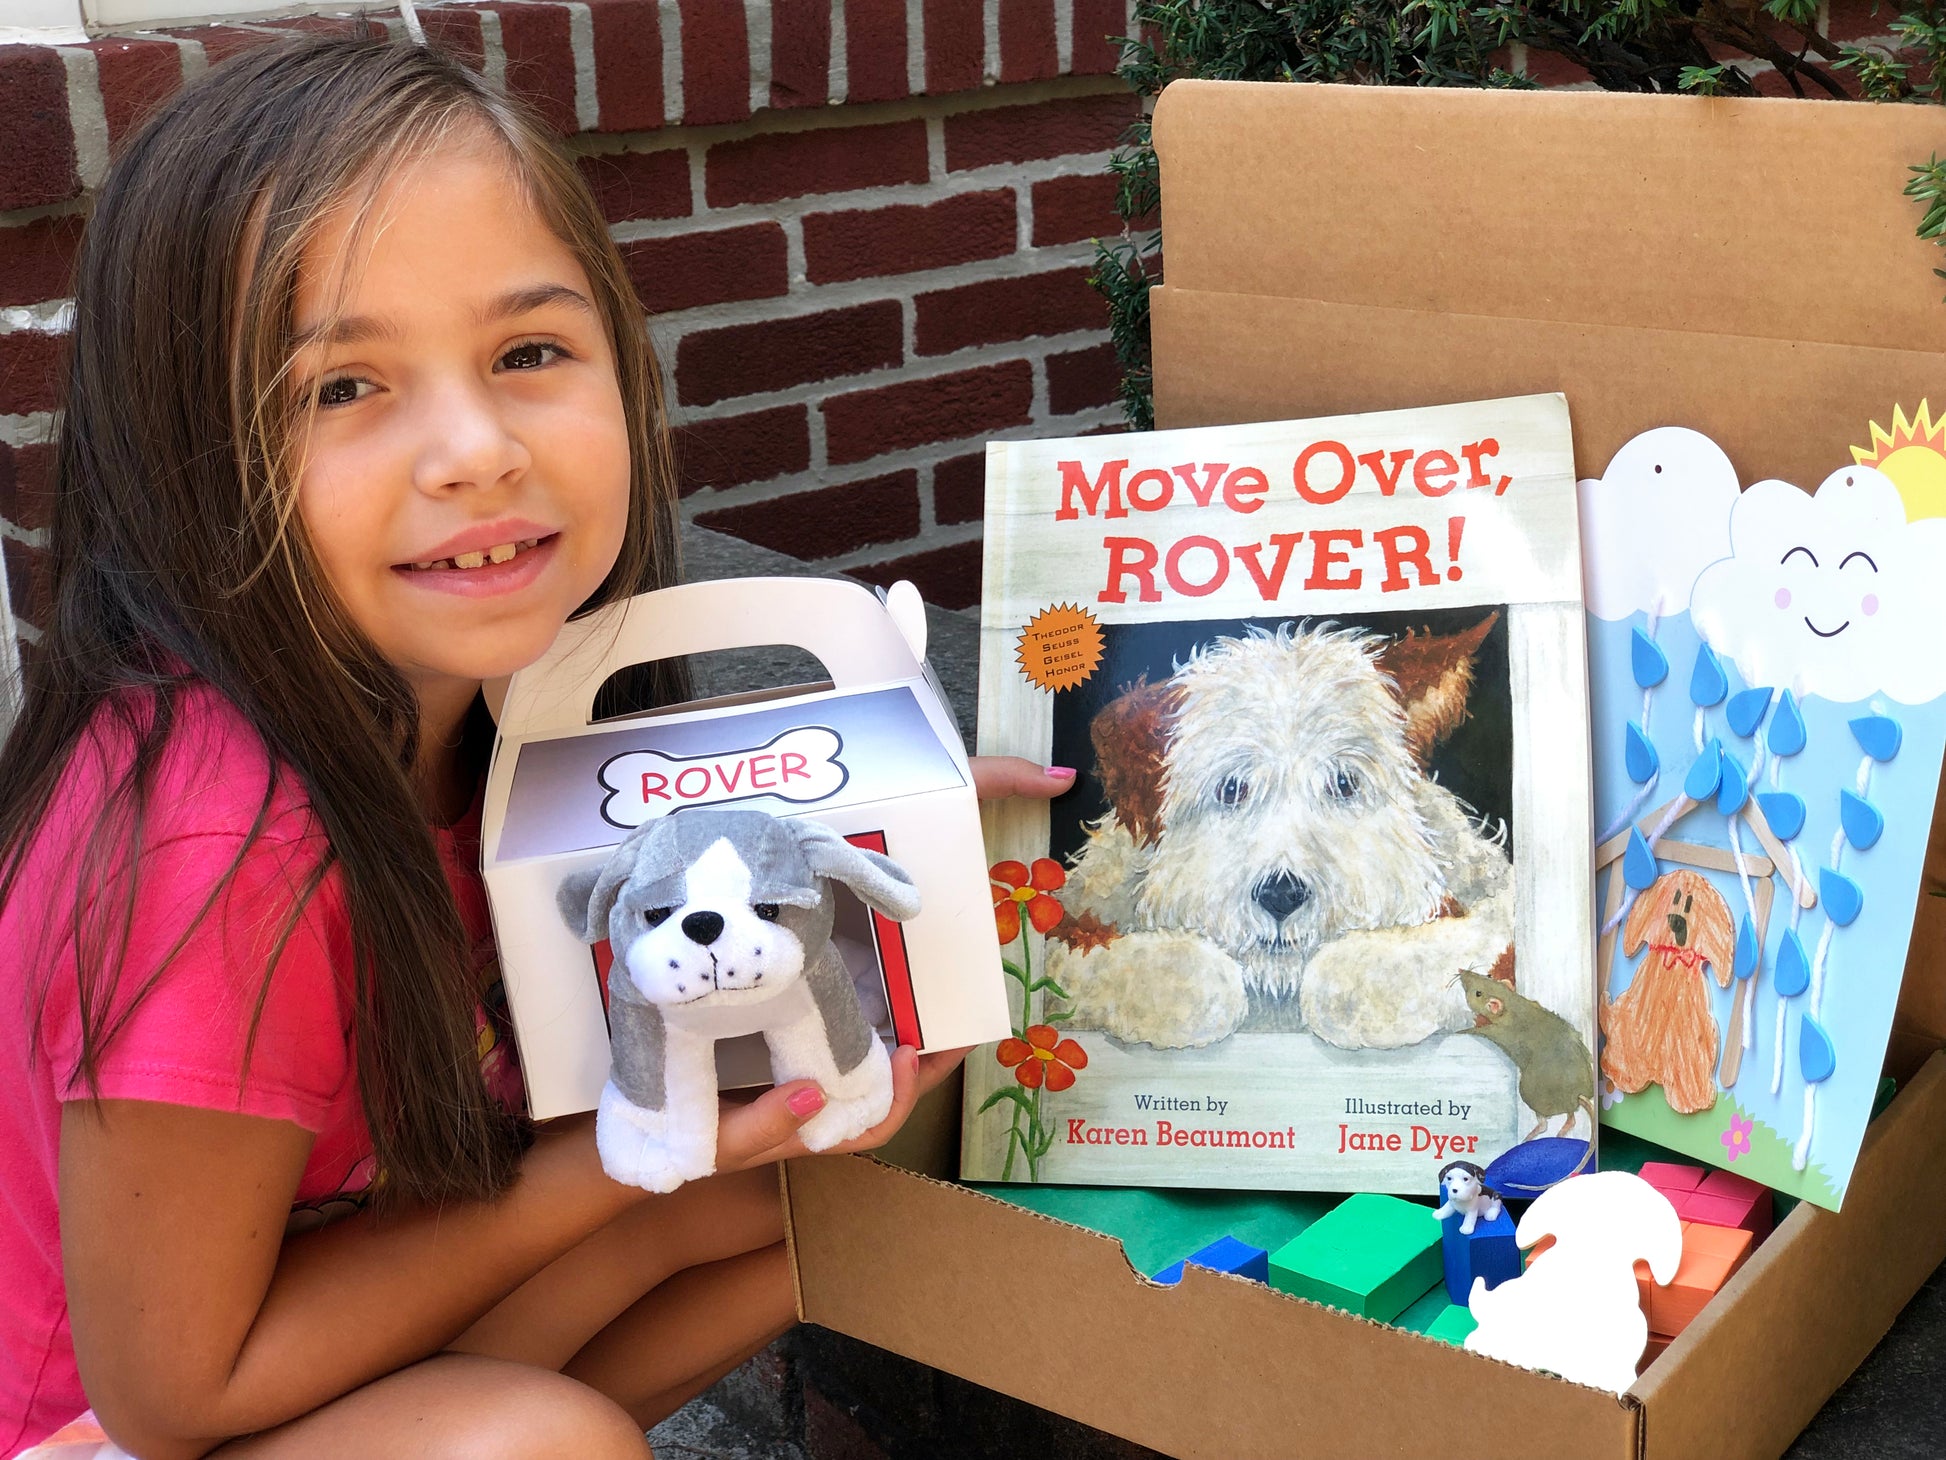 STEM kit inspired by the book Move Over Rover